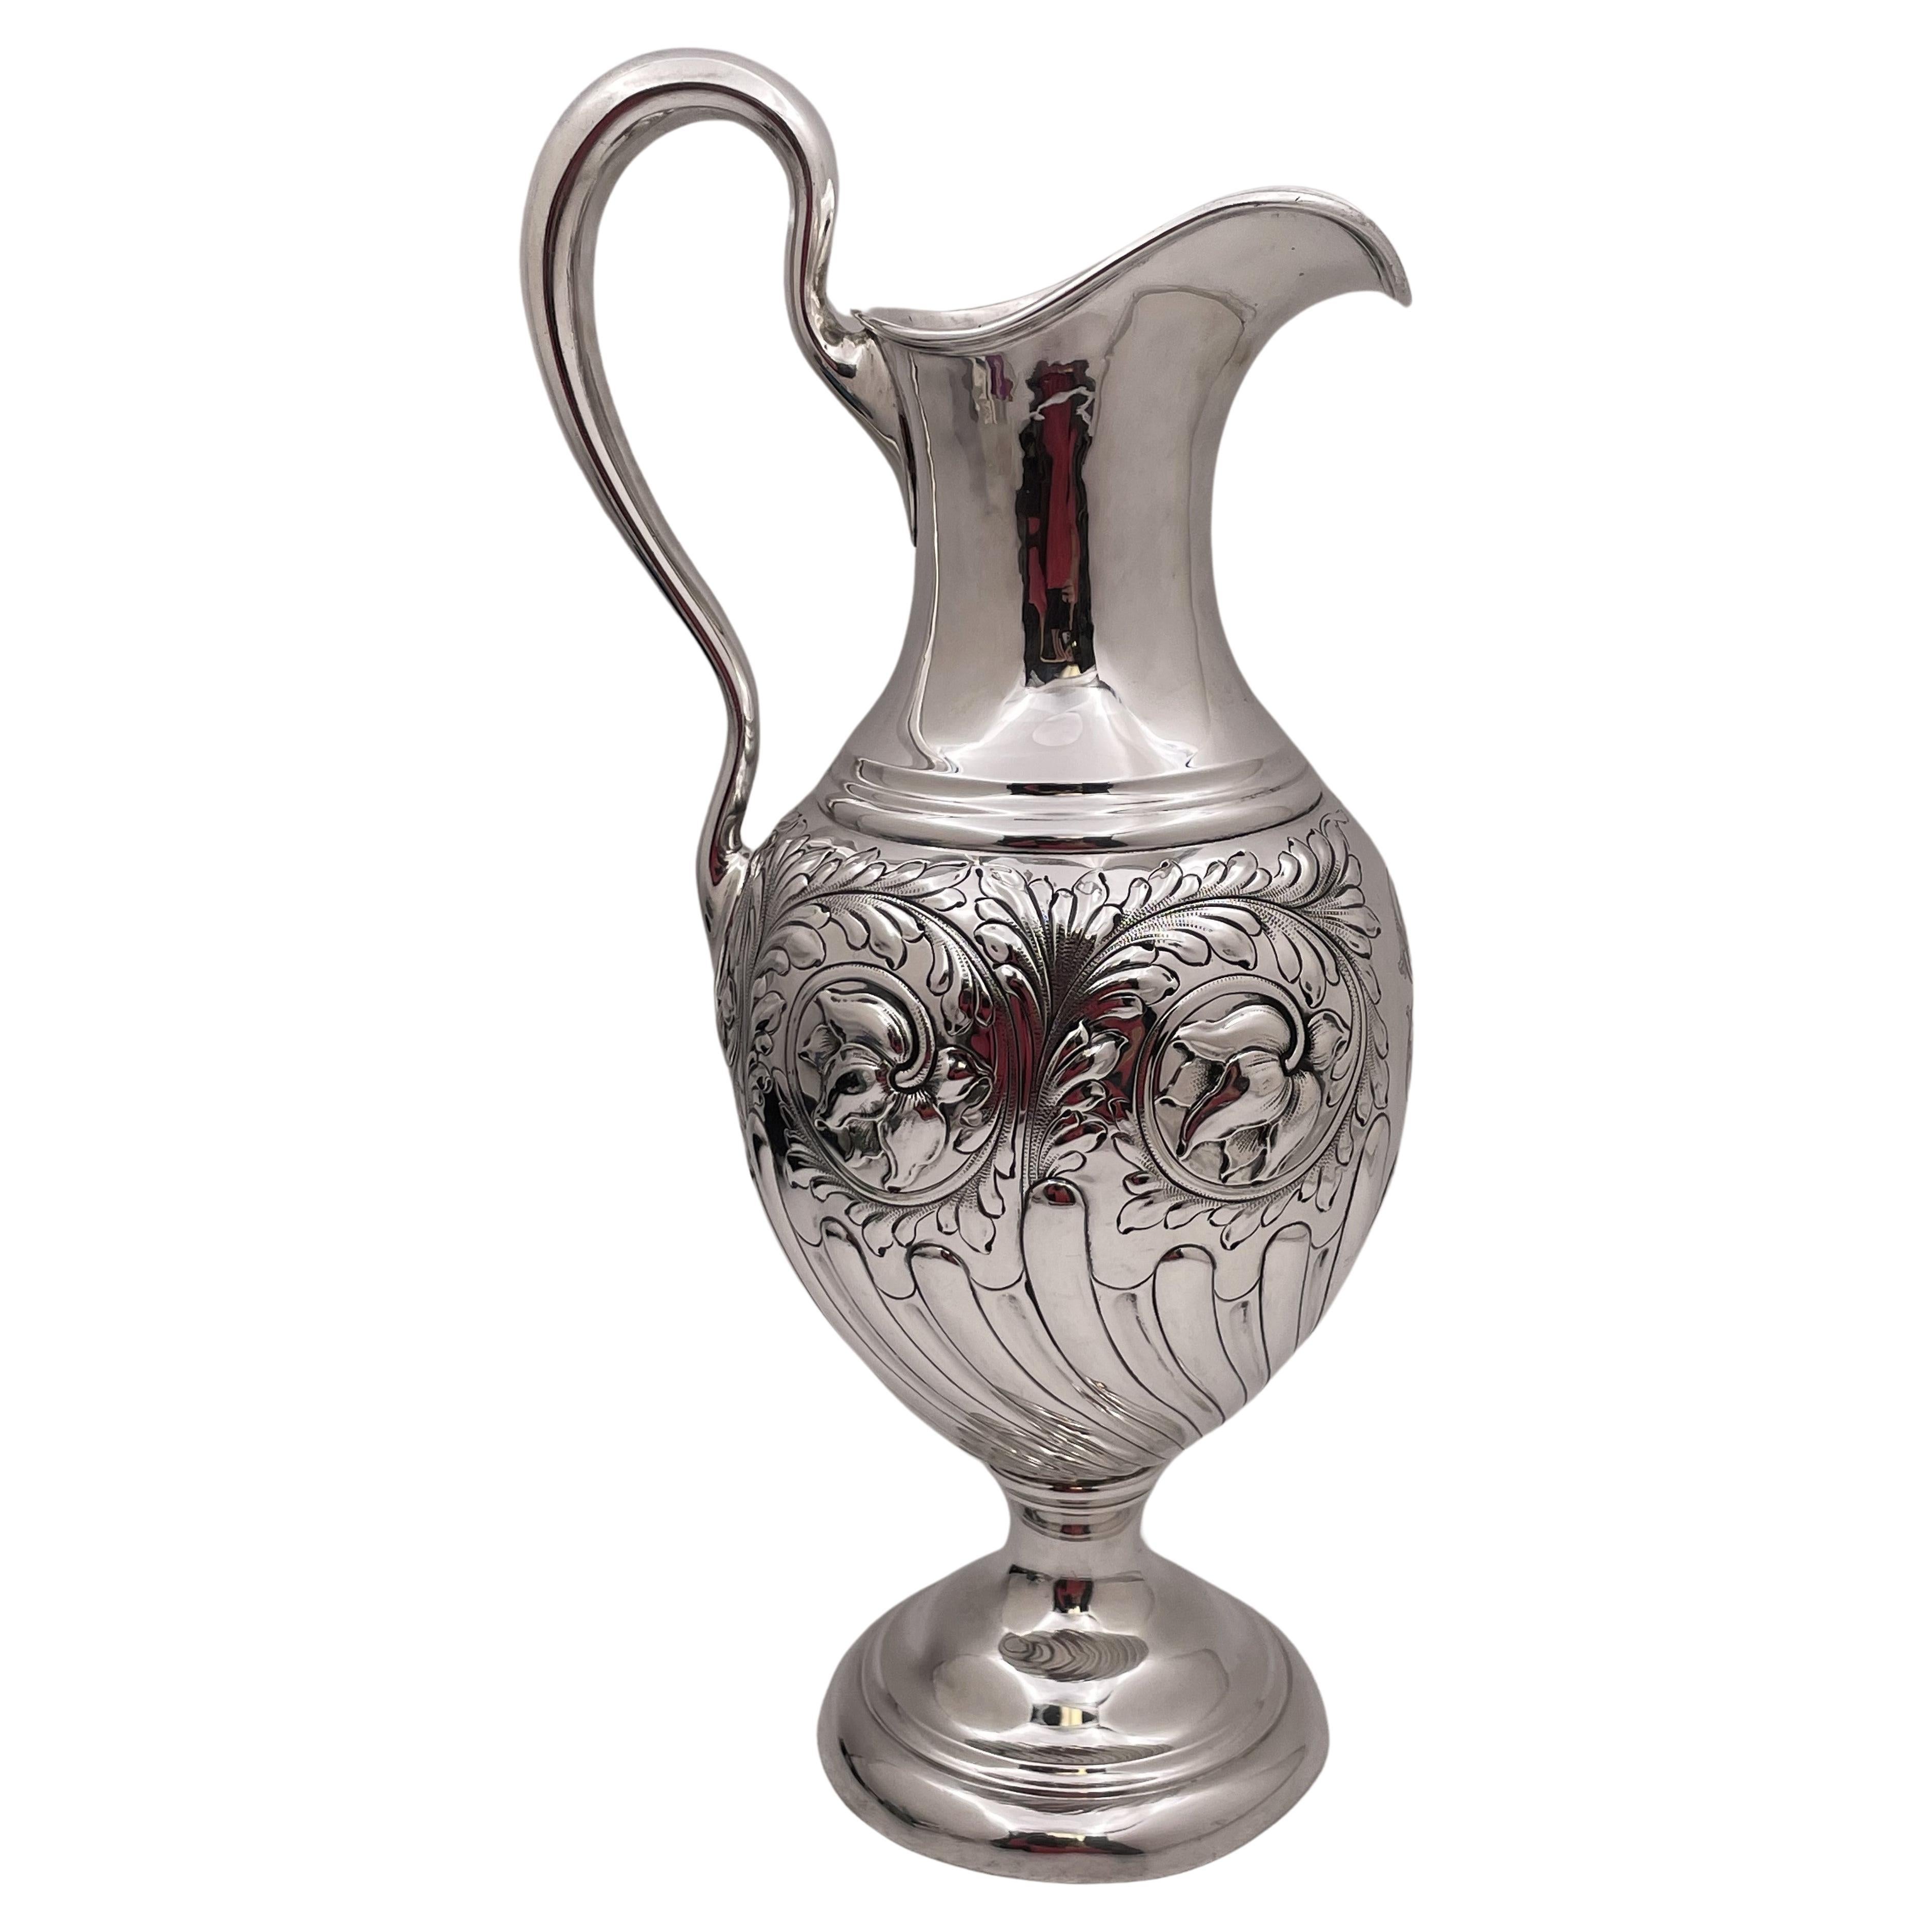 Lebkuecher Sterling Silver Pitcher Jug in Art Nouveau Style Early 20th Century